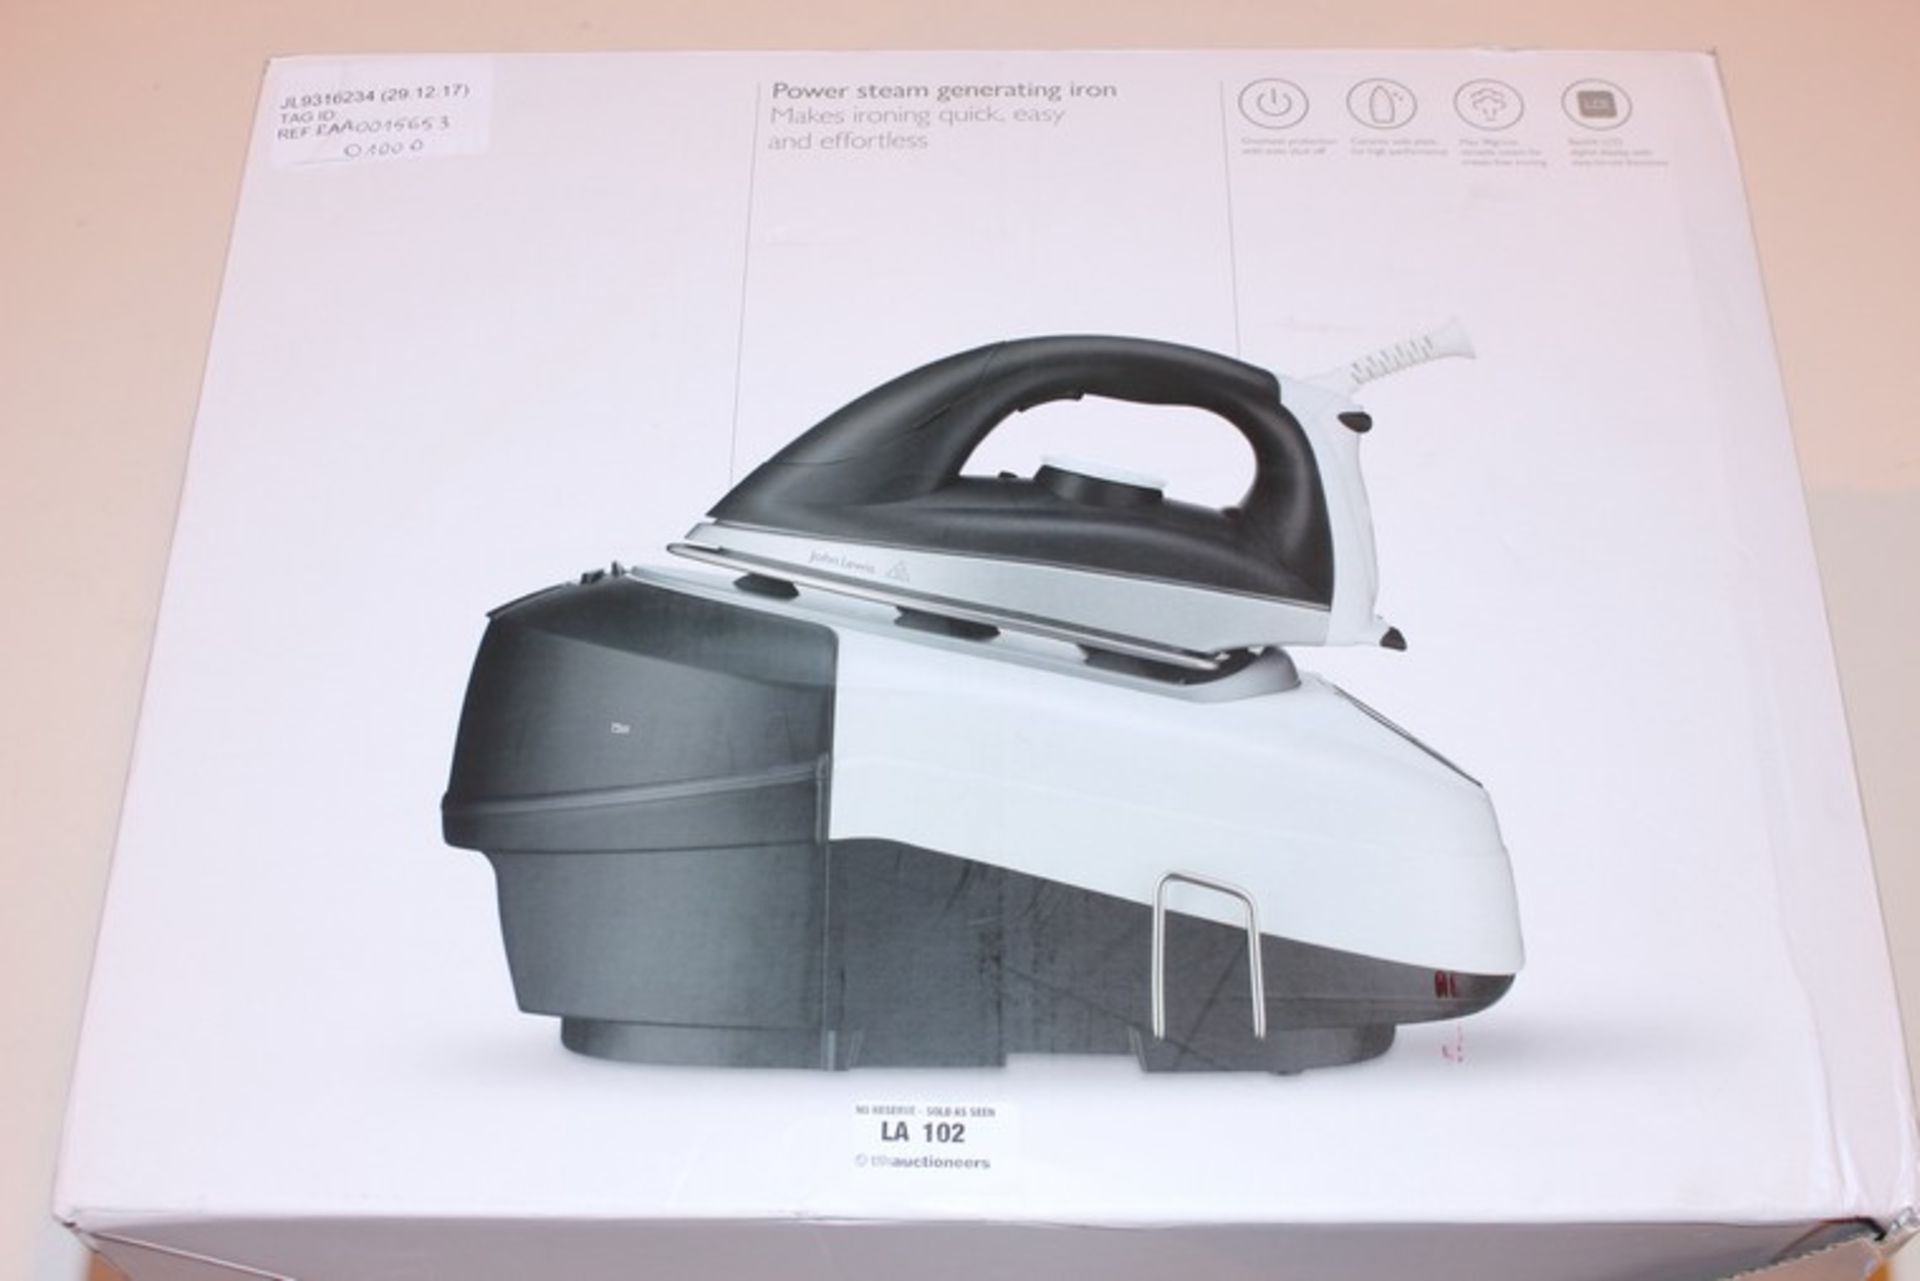 1 x JOHN LEWIS POWER STEAM GENERATING IRON RRP £100 (29.12.17) (RAA0015673) *PLEASE NOTE THAT THE